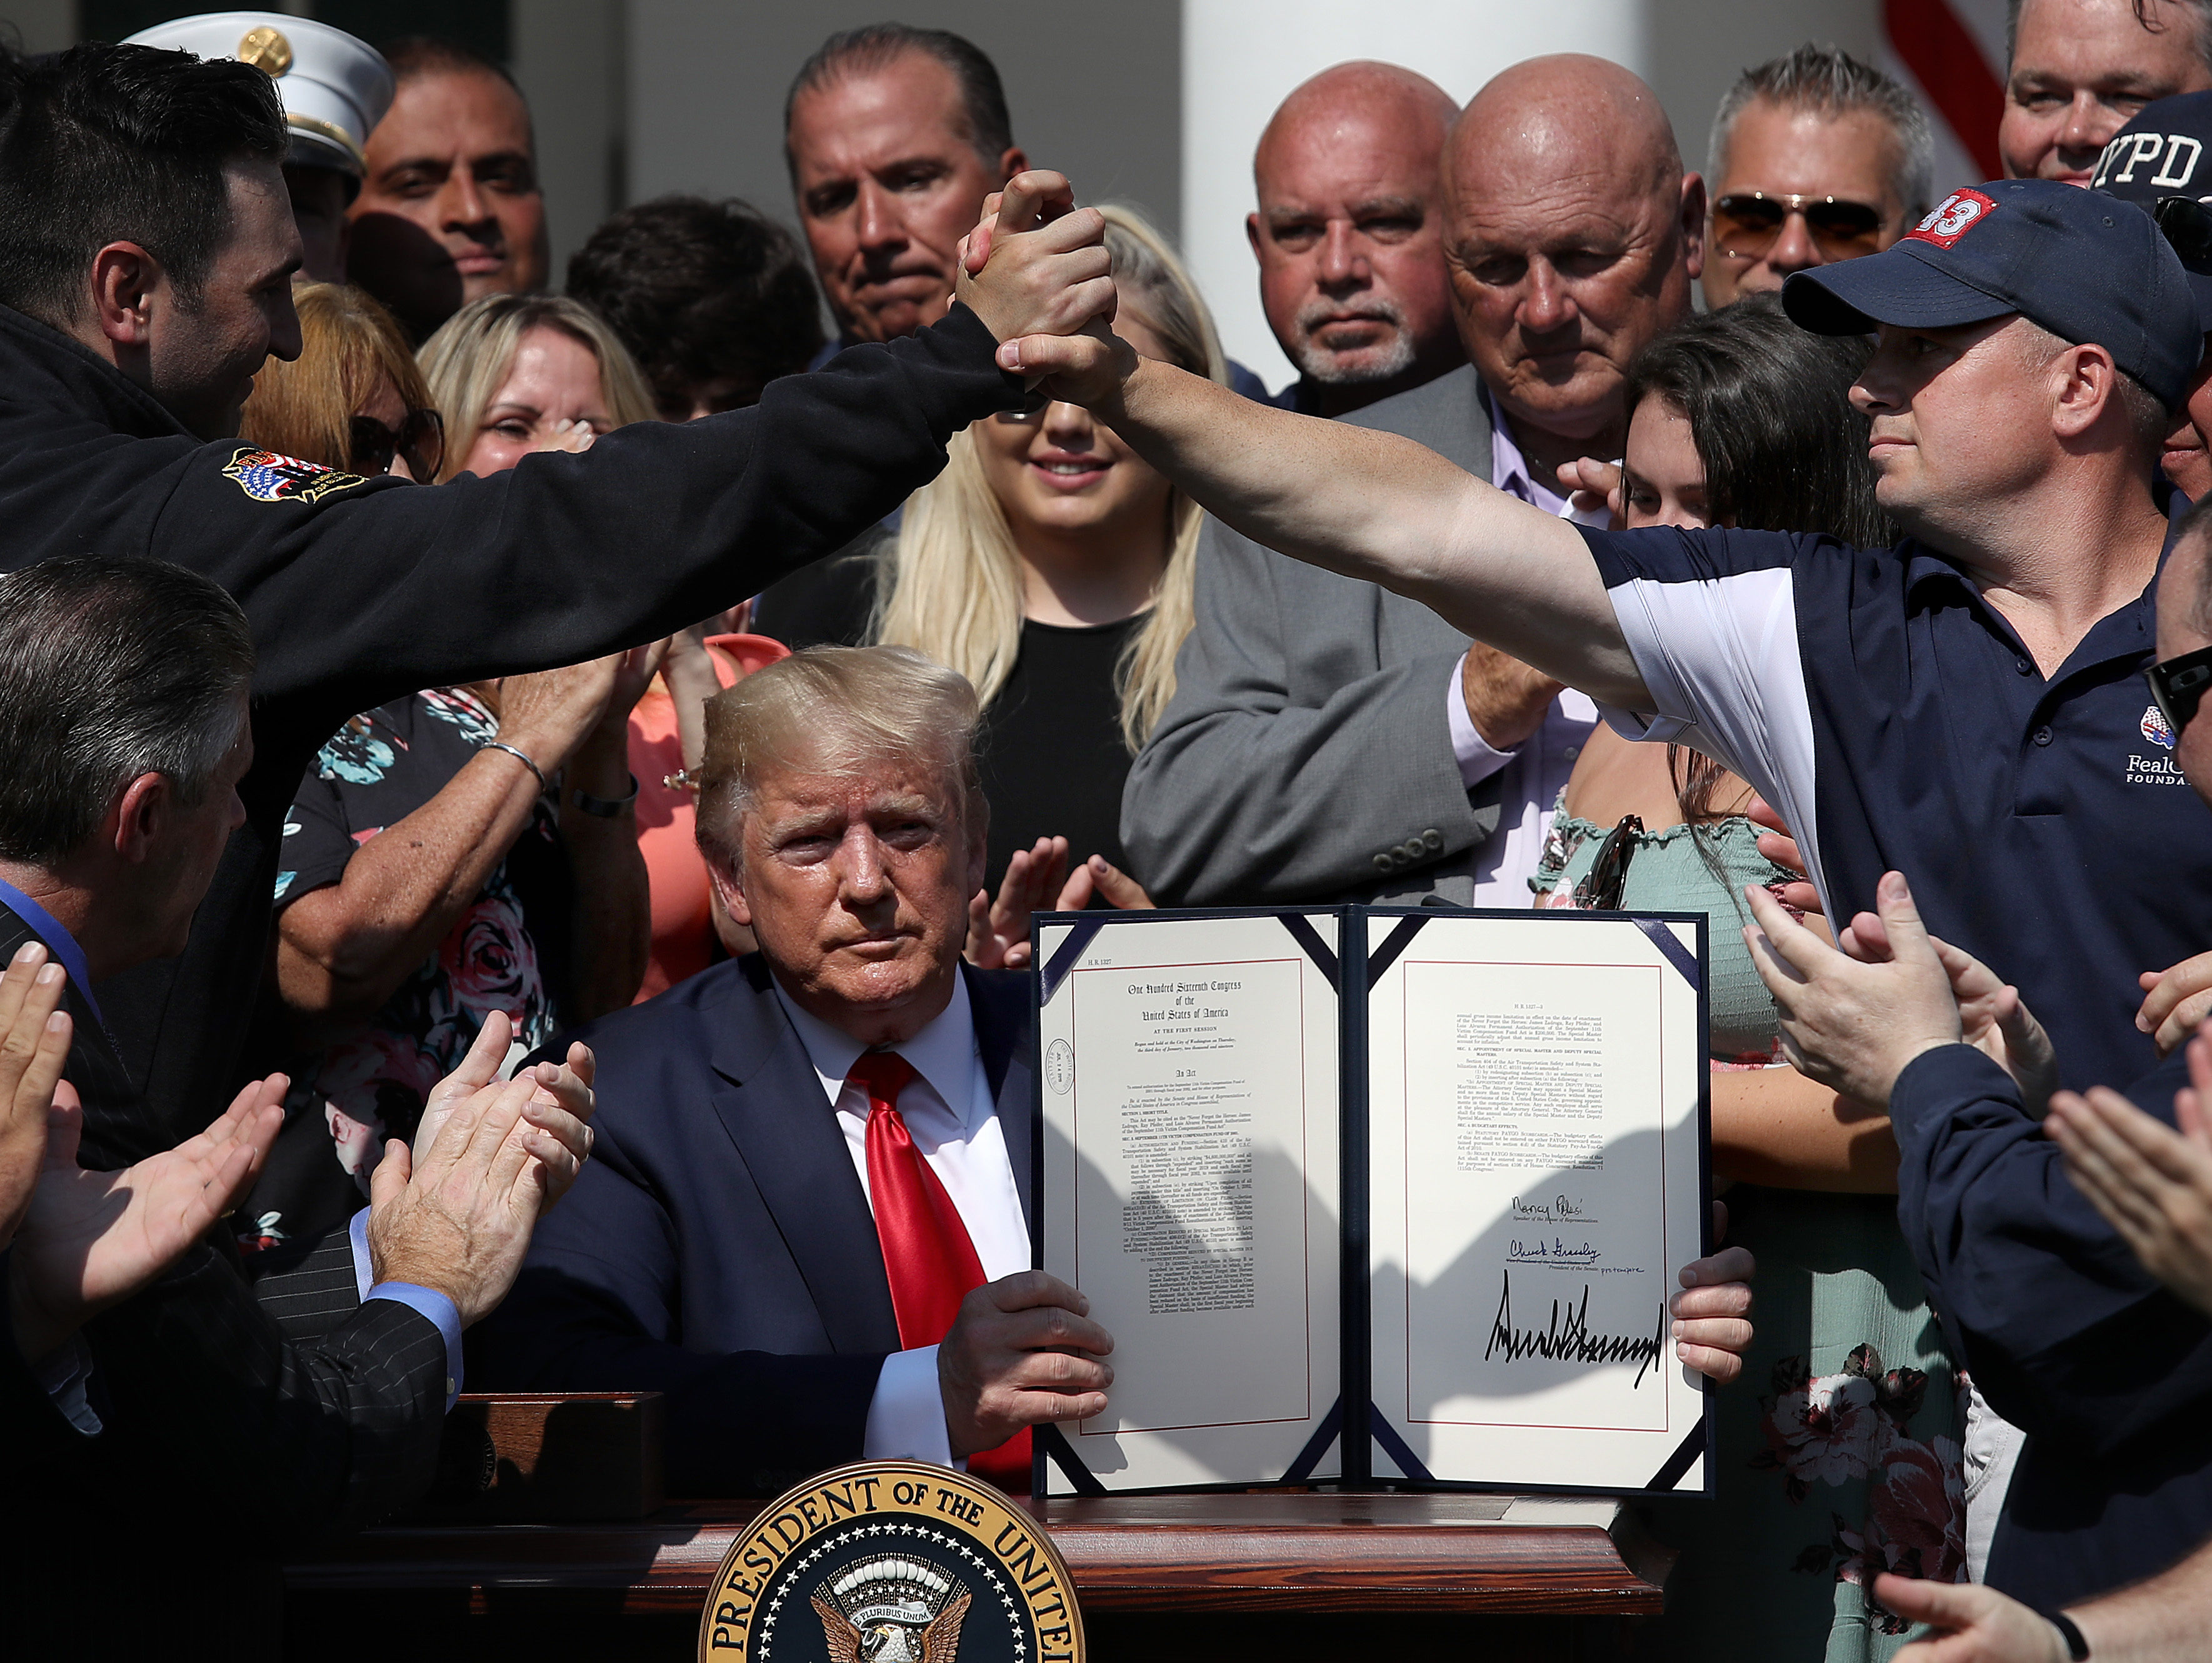 WASHINGTON, DC - JULY 29: As first responders and their families celebrate, U.S. President Donald Trump shows off his signature on H.R. 1327, an act to permanently authorize the September 11th victim compensation fund, in the Rose Garden of the White House July 29, 2019 in Washington, DC. The bill will provide continued funding for health care compensation for first responders of the 9/11 attacks at the World Trade Center. (Photo by Win McNamee/Getty Images)